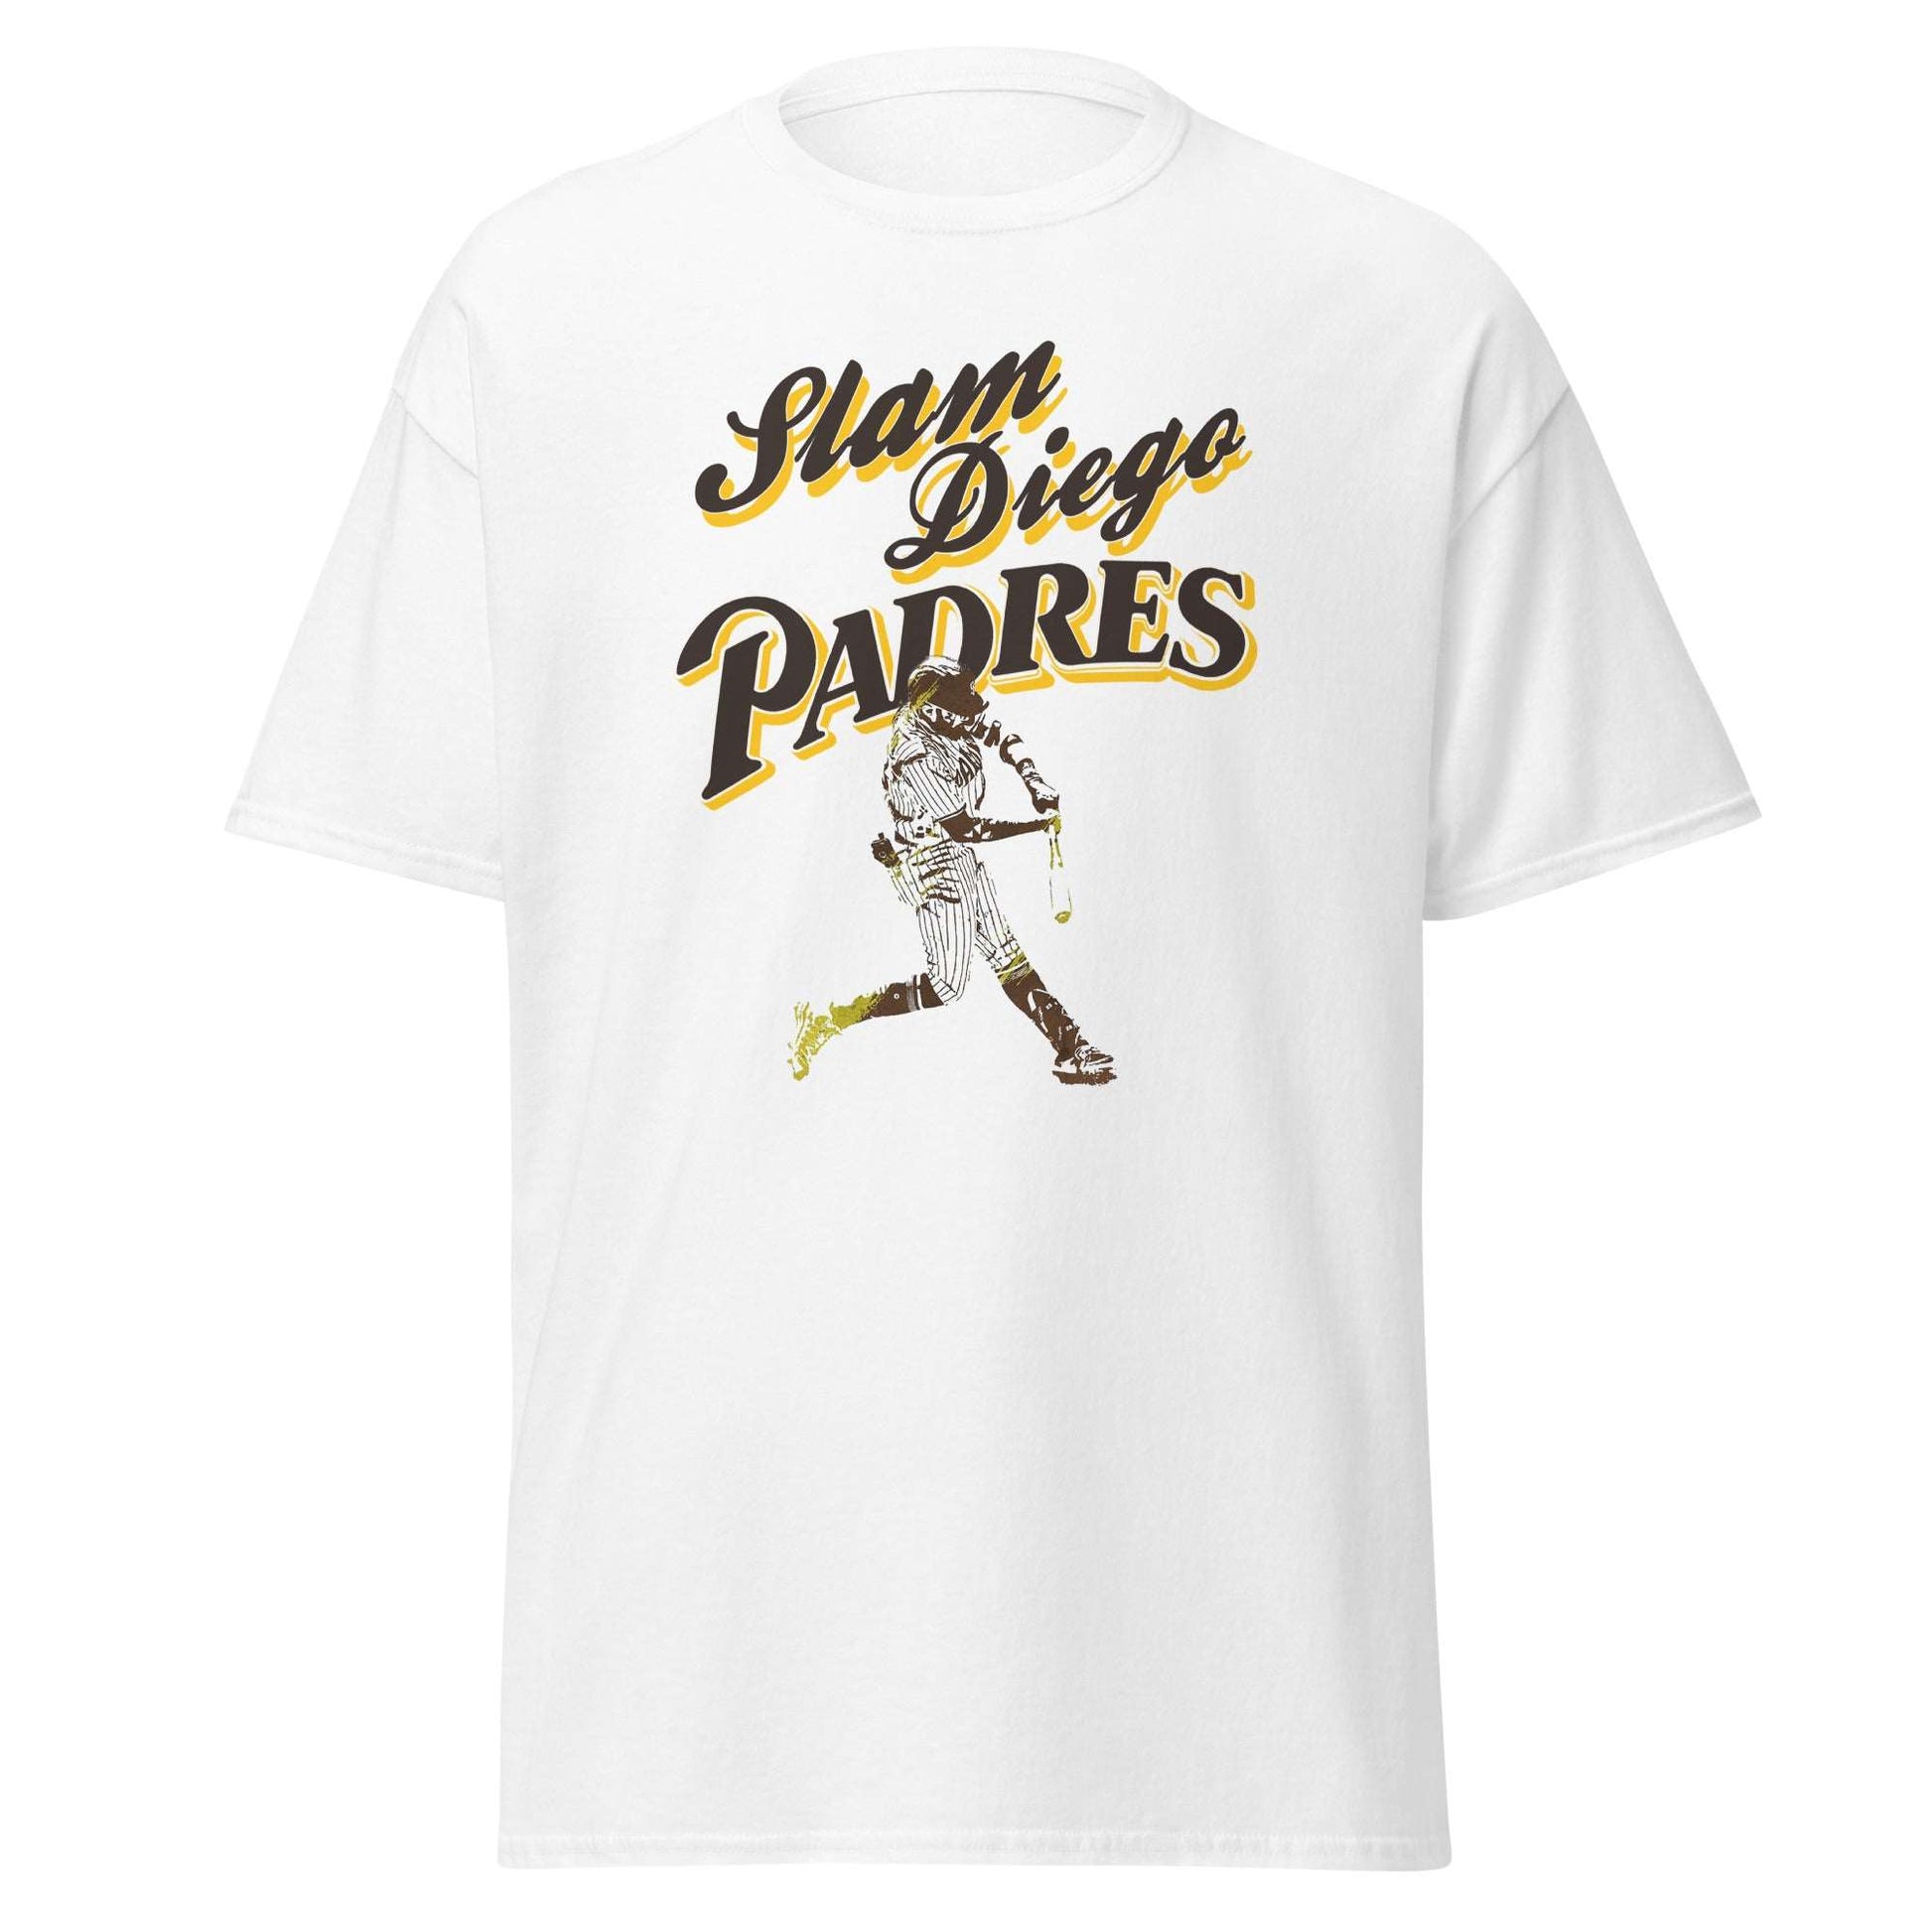 Slam Diego: Get your new San Diego Padres t-shirt now